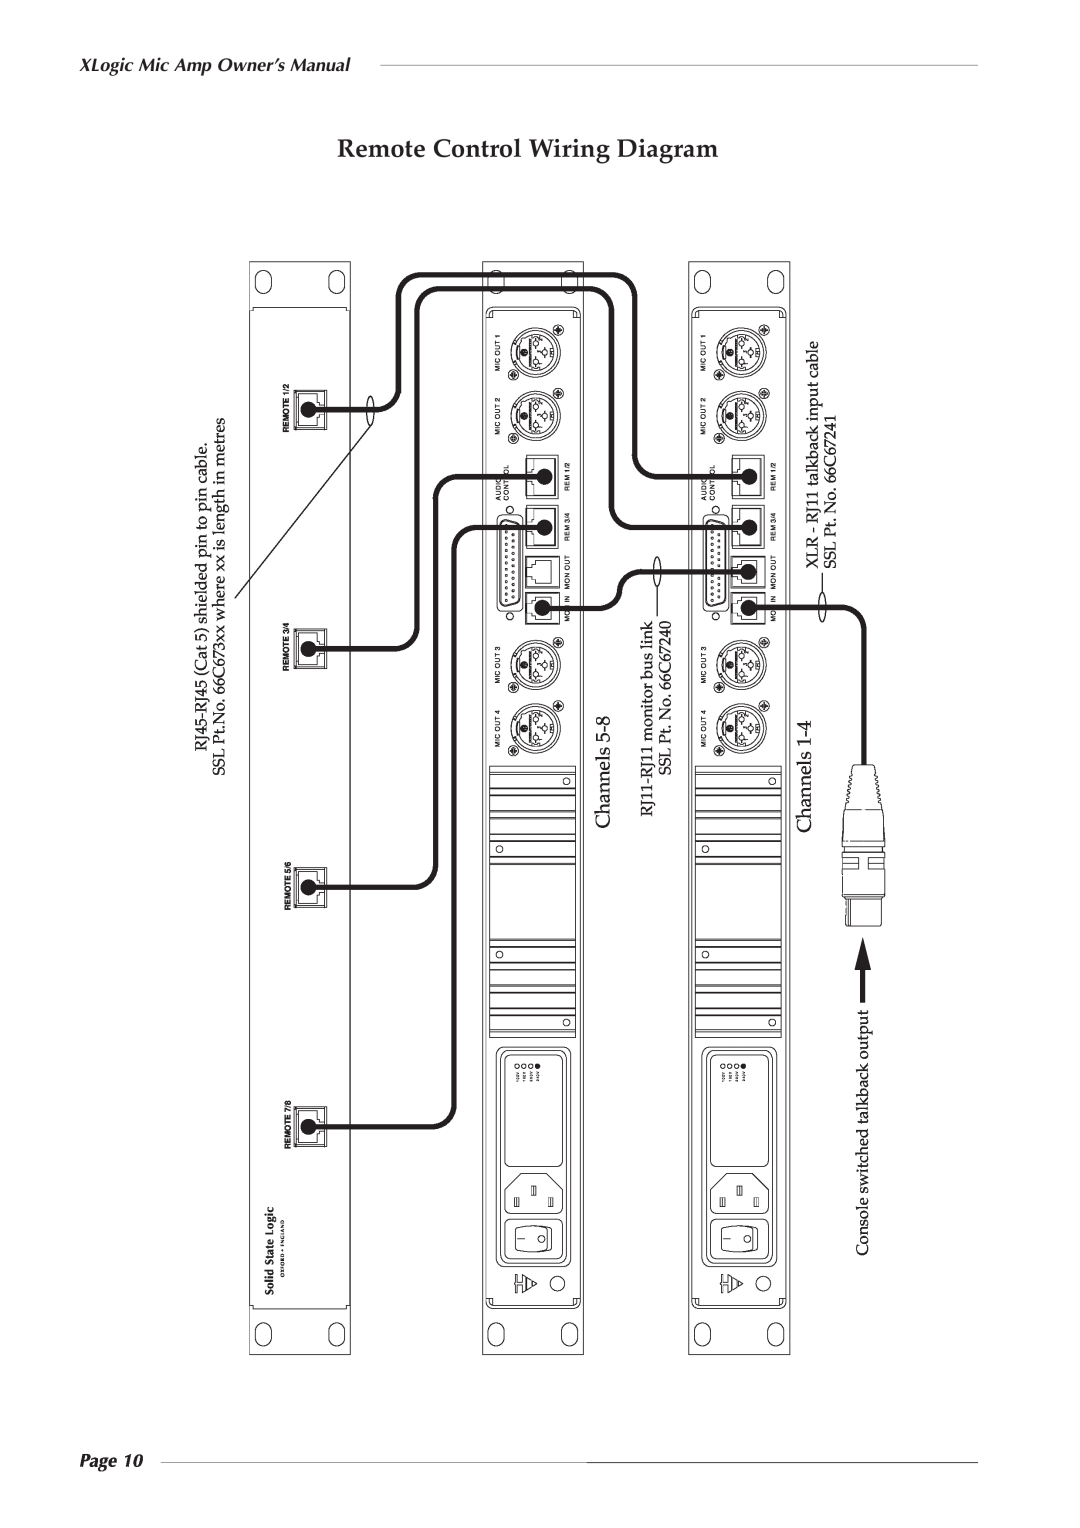 Solid State Logic 82S6XL020E Remote Control Wiring Diagram, Channels, Page, Solid LogicState, REMOTE 1/2, REMOTE 3/4 